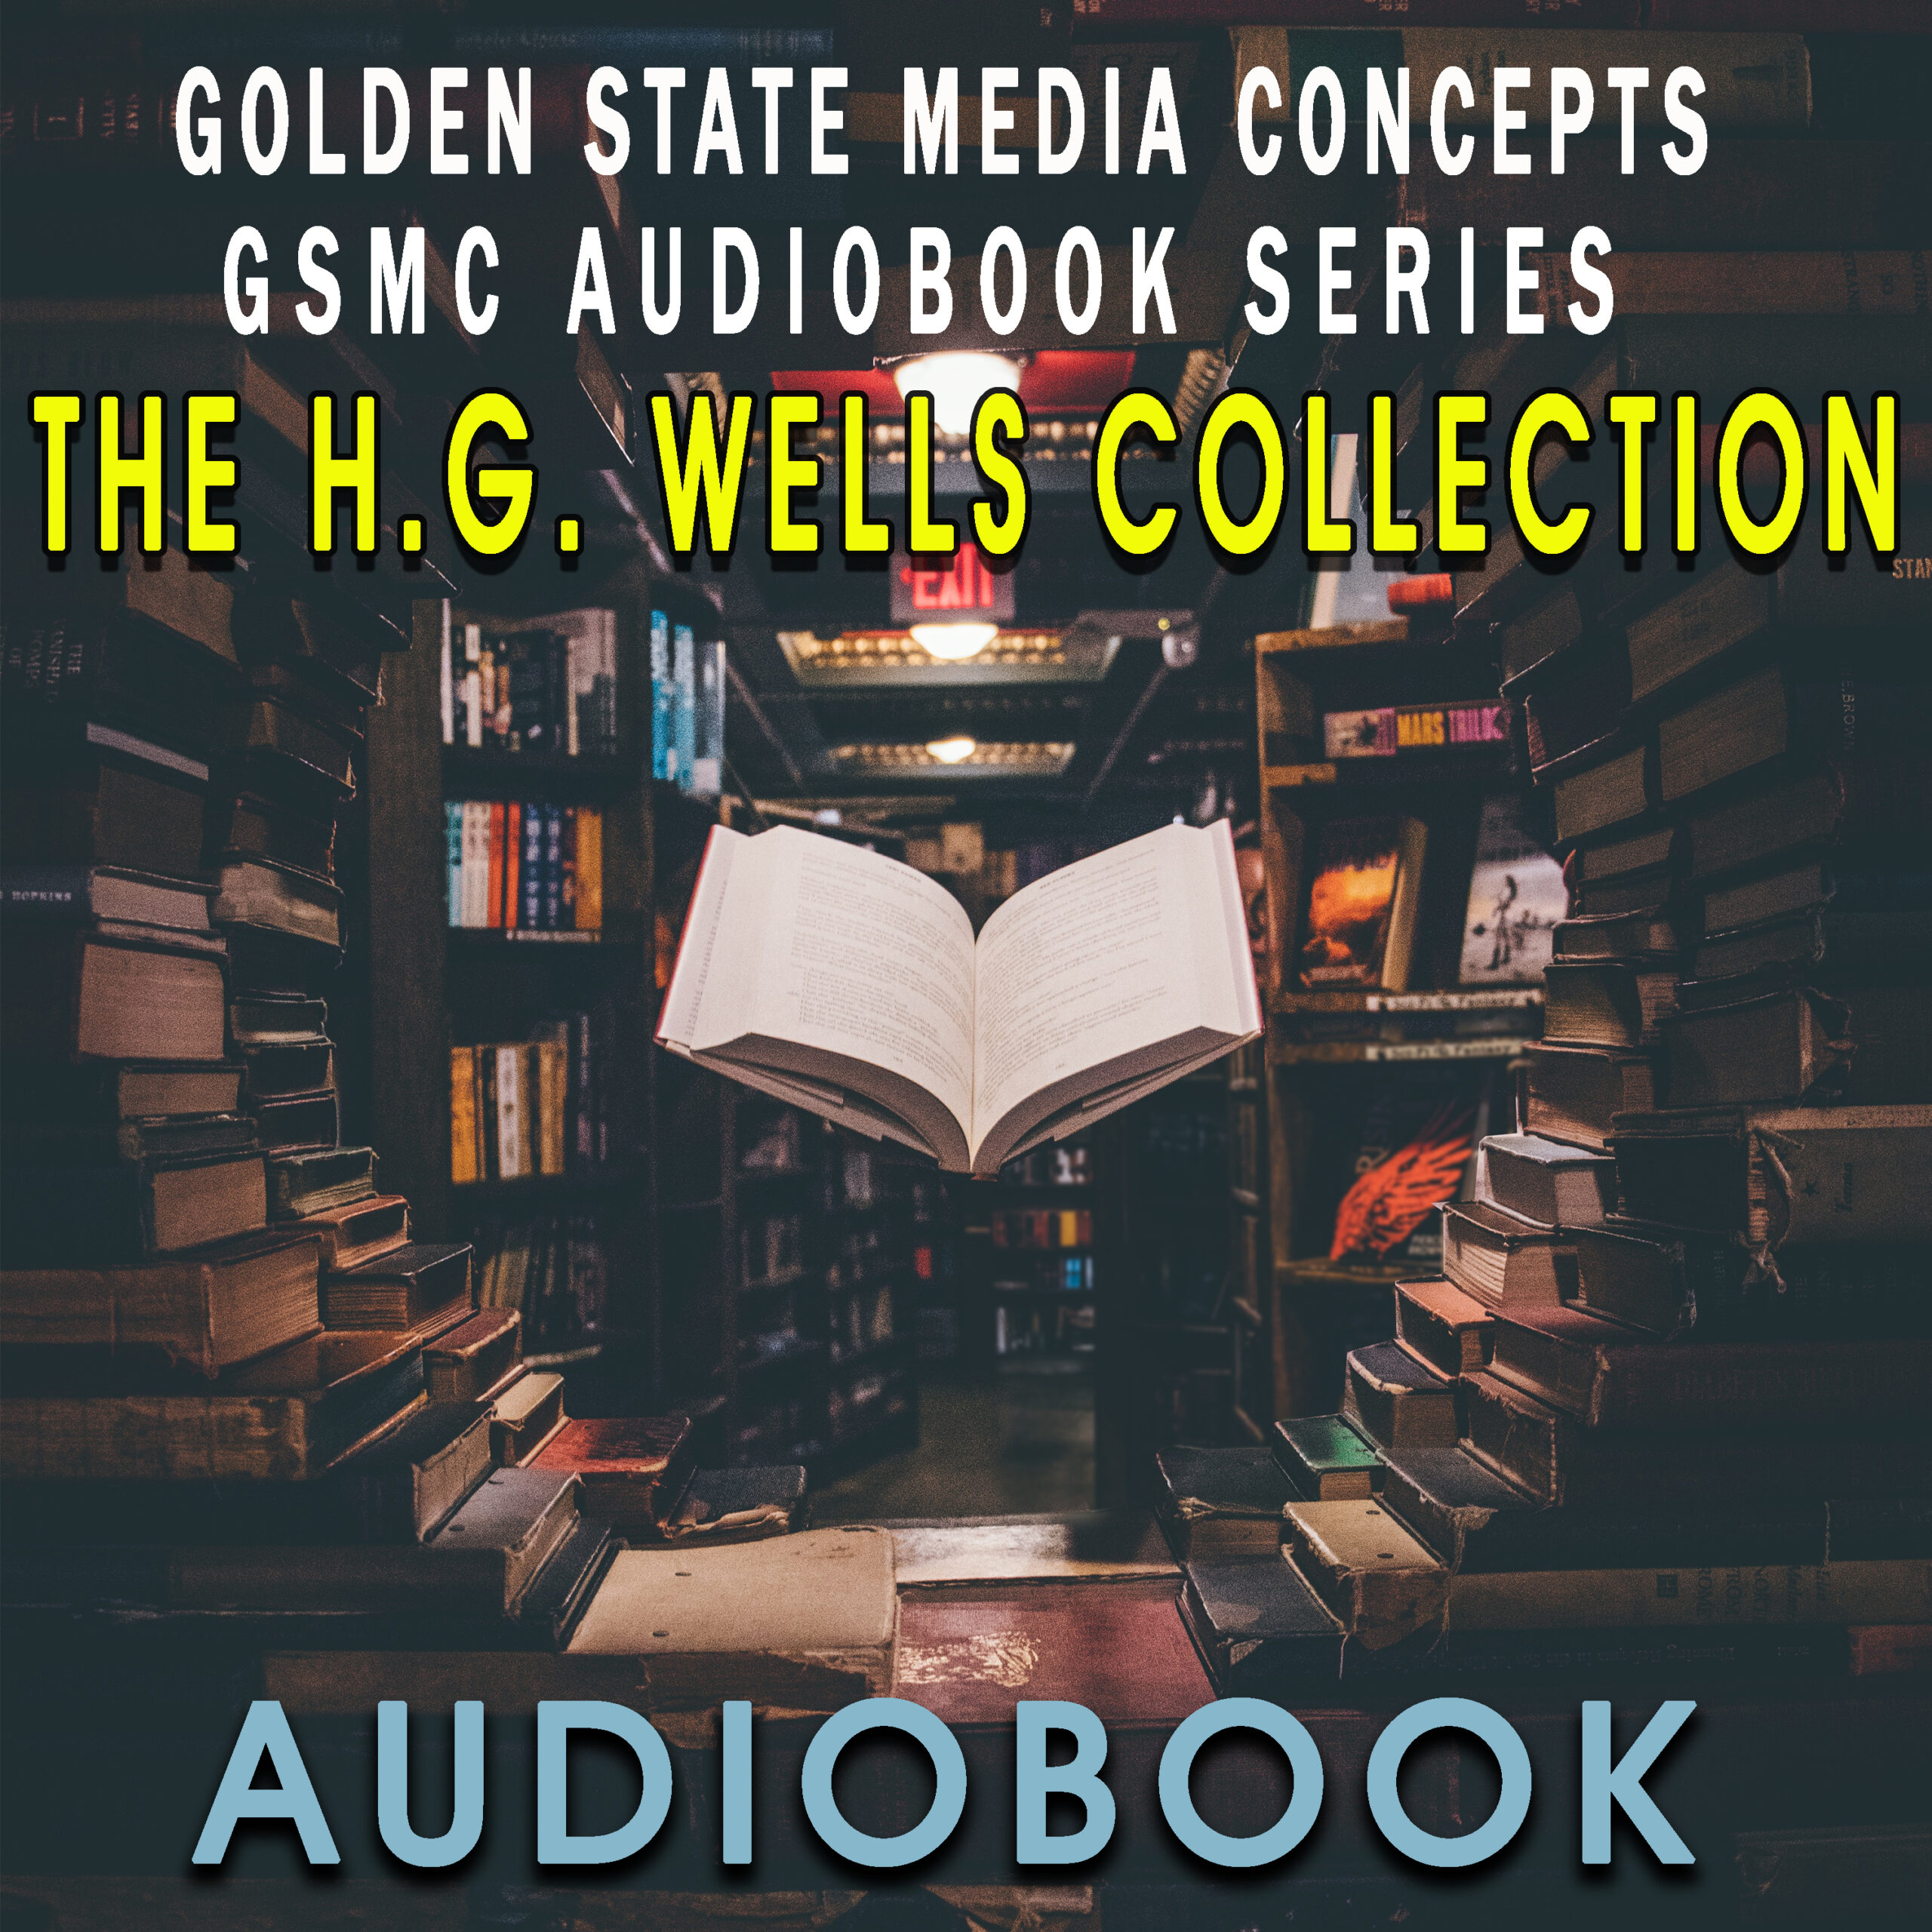 GSMC Audiobook Series: The H.G. Wells Collection